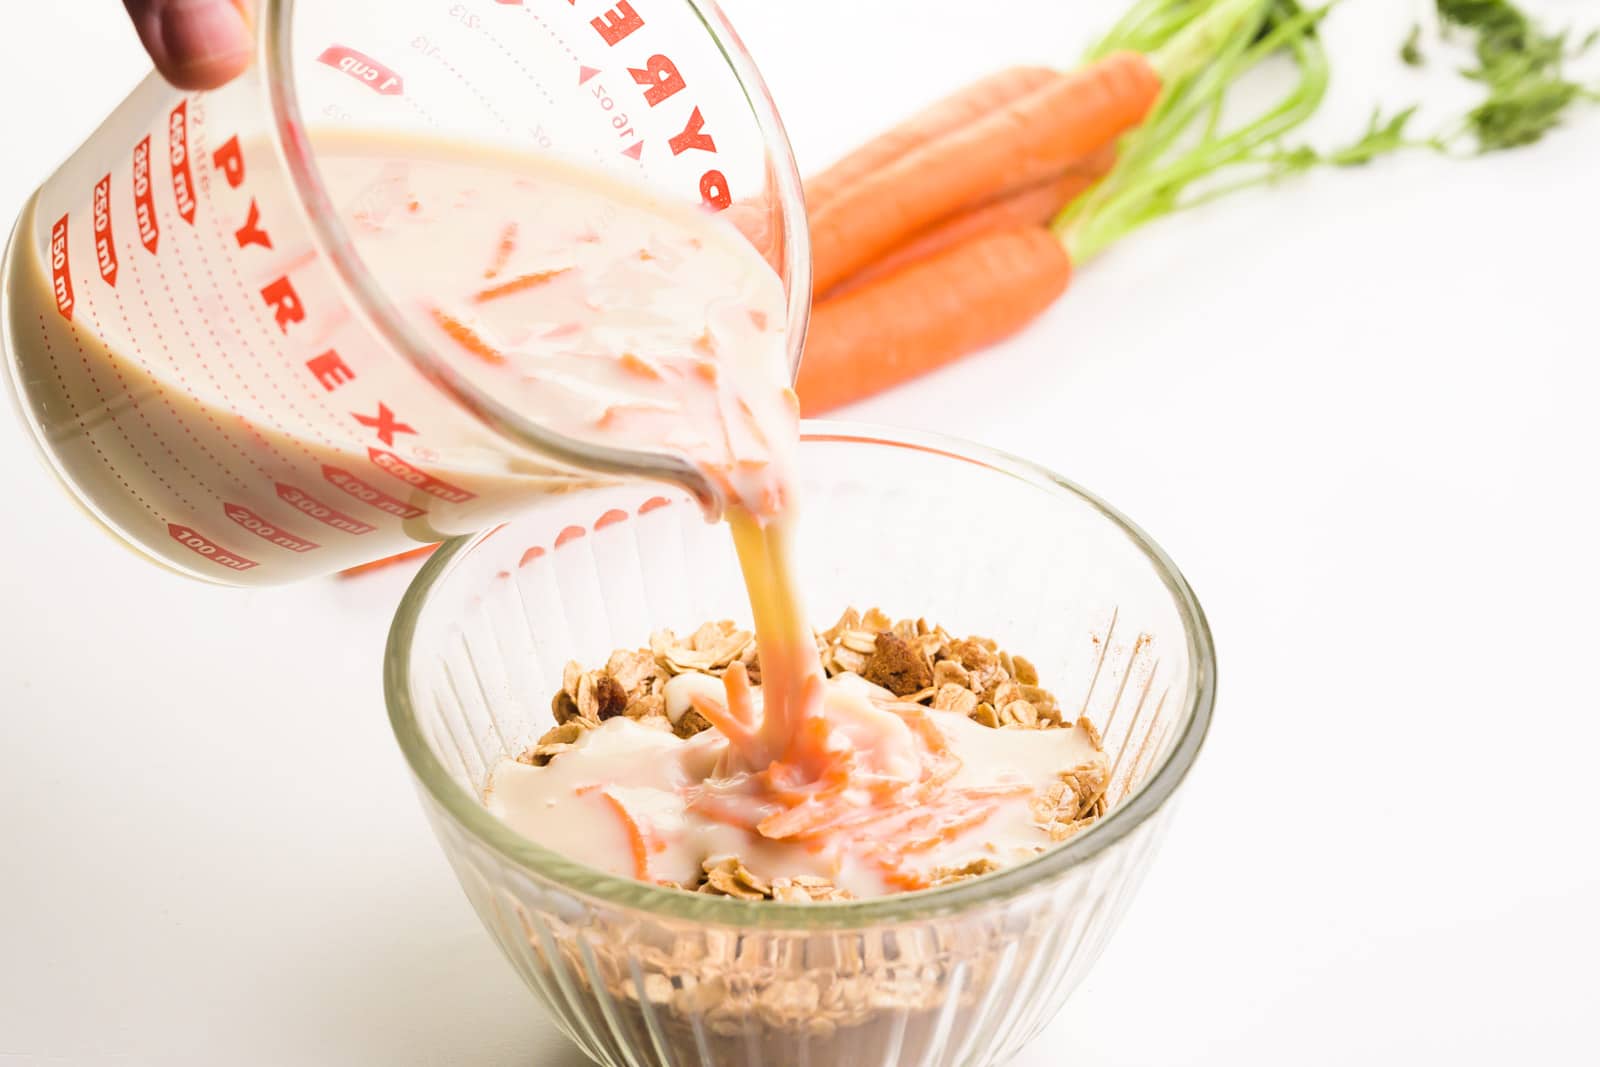 A hand holds a measuring cup pouring wet ingredients into a bowl with oats and spices. There are raw carrots in the background.